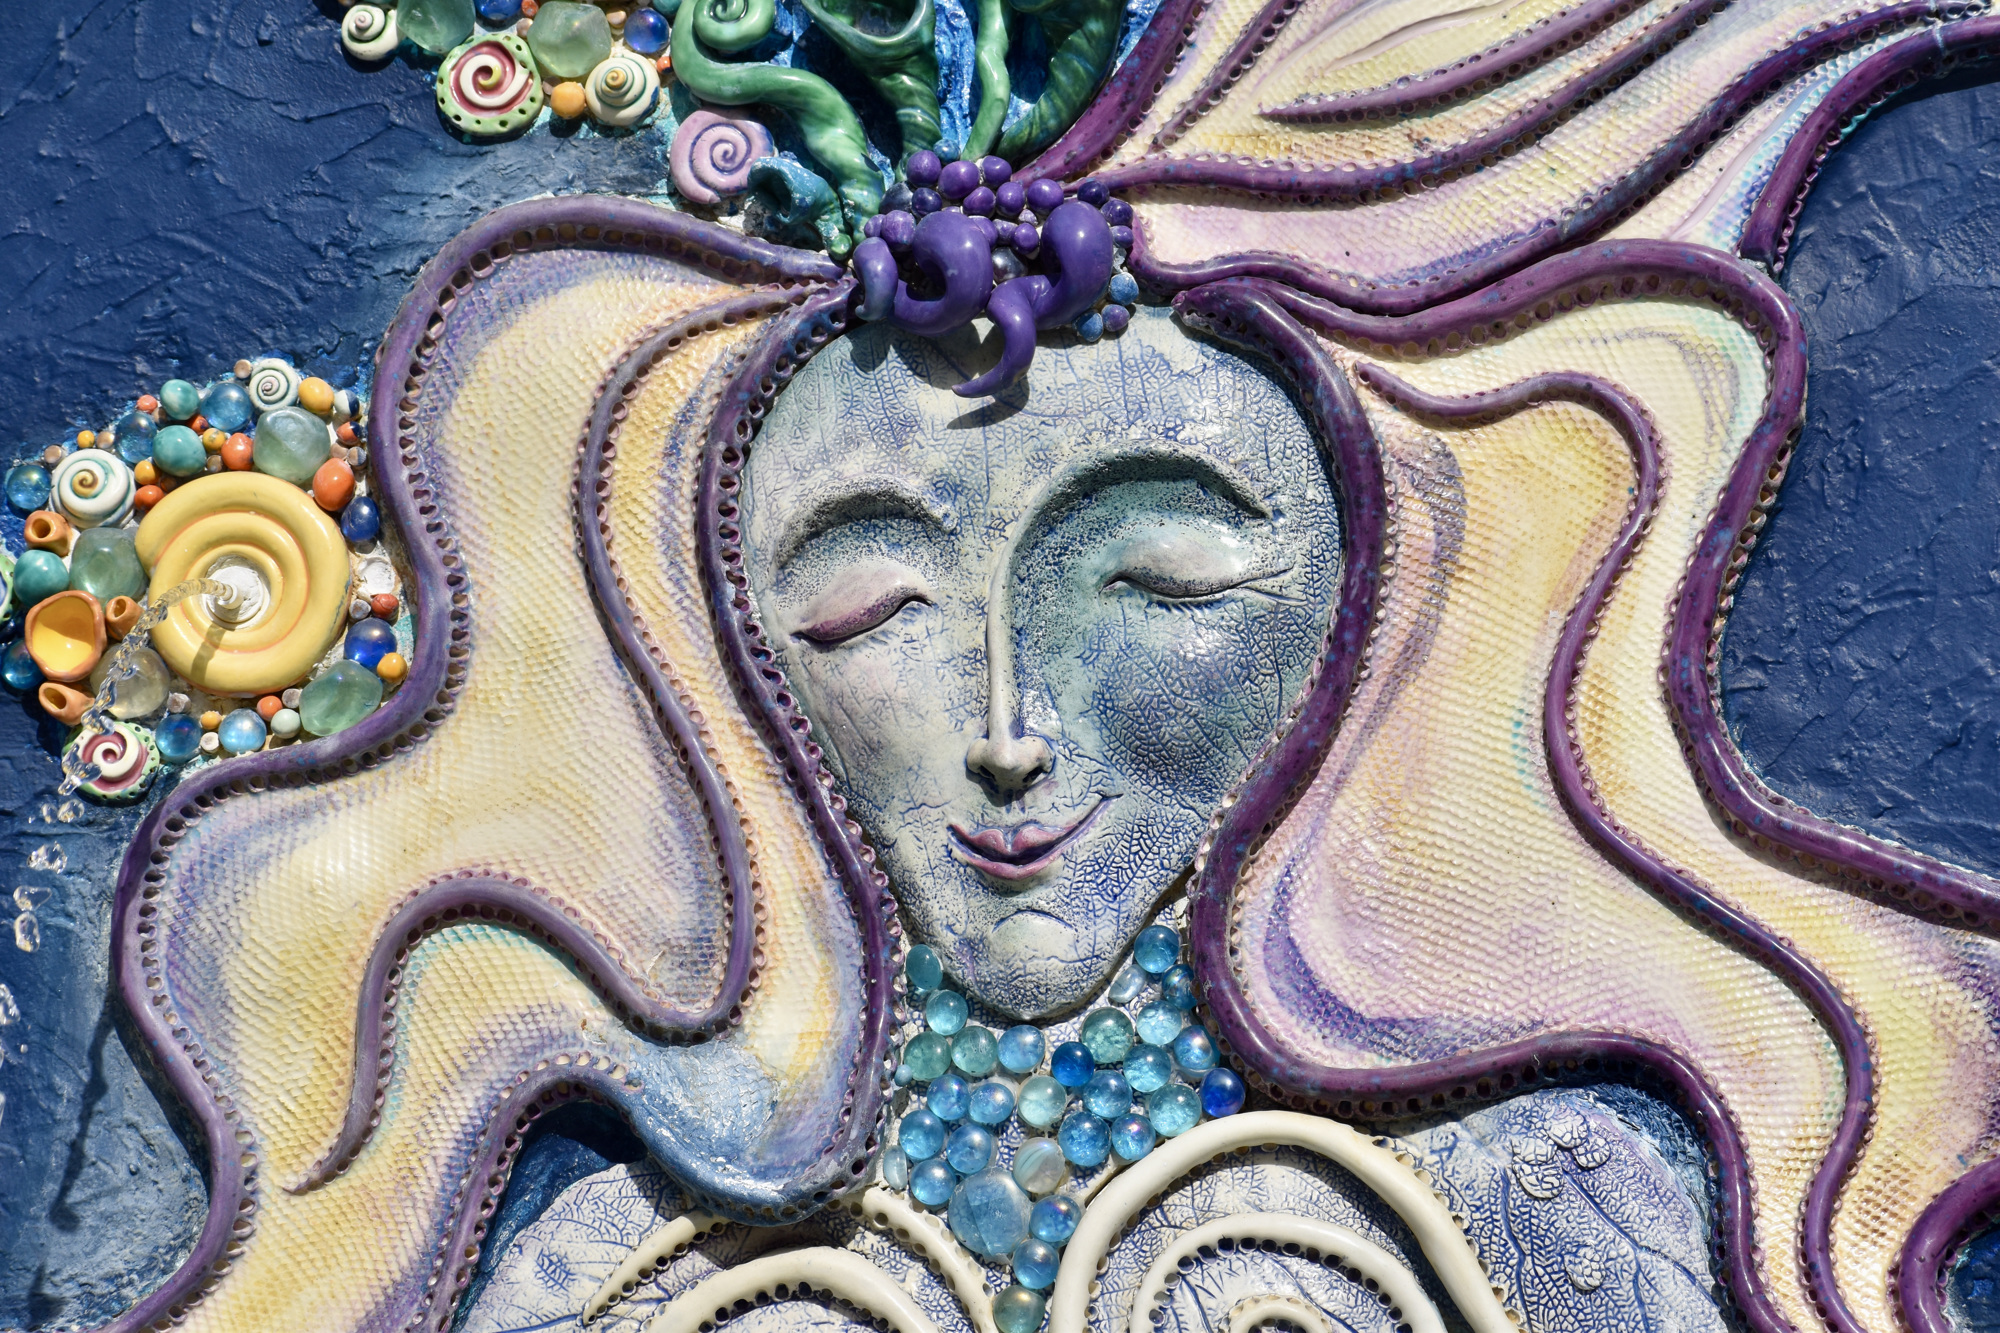 Whimsical artwork adorns the centerpiece of the park, a mermaid fountain crafted by Nancy Goodheart Matthews.